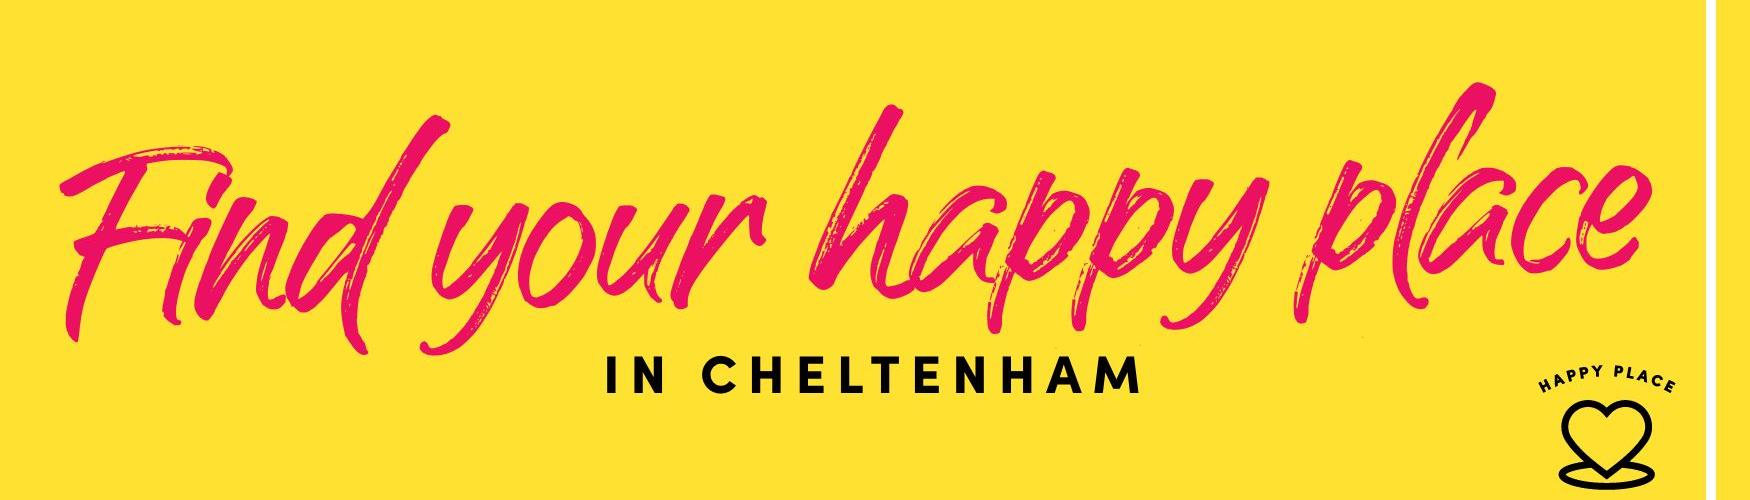 Find your Happy Place in Cheltenham